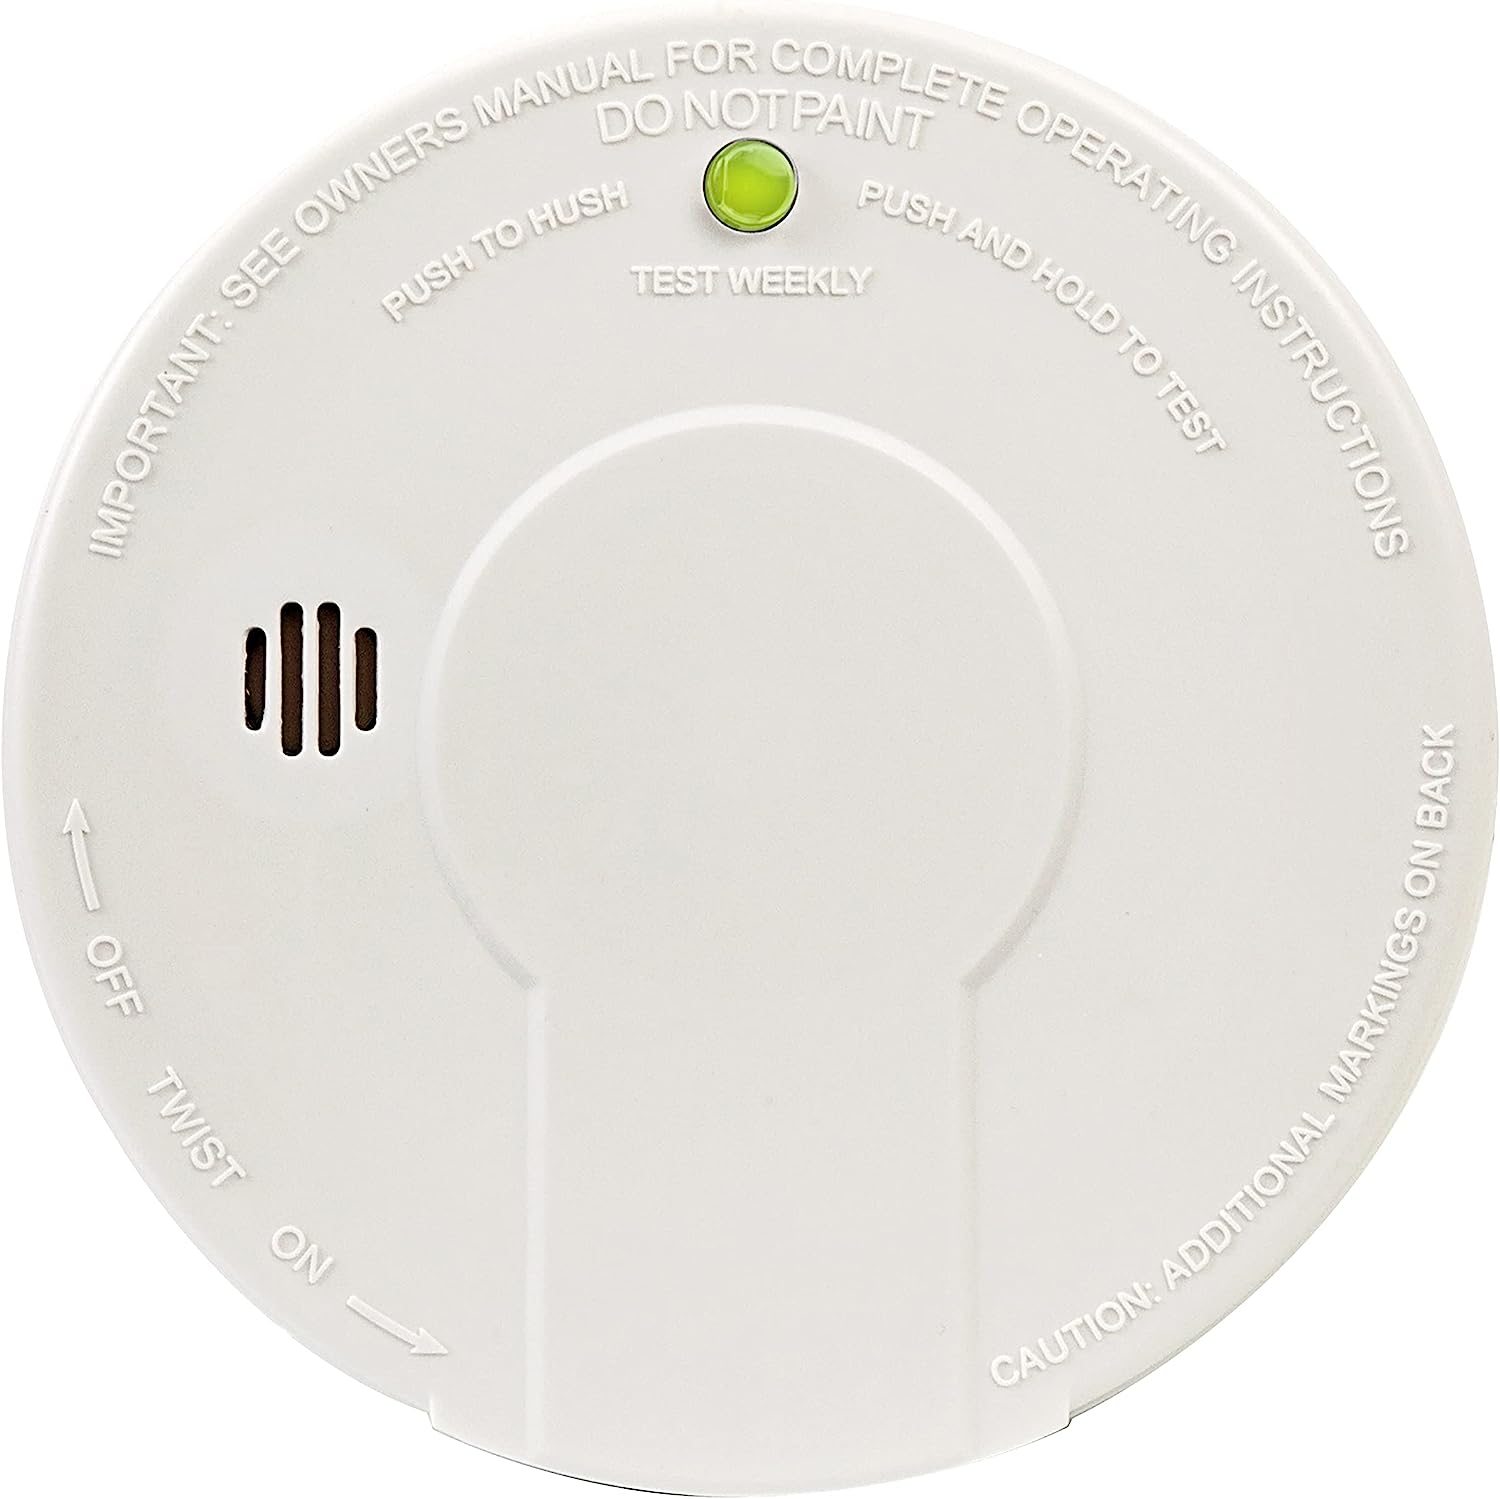 battery operated smoke detectors product review